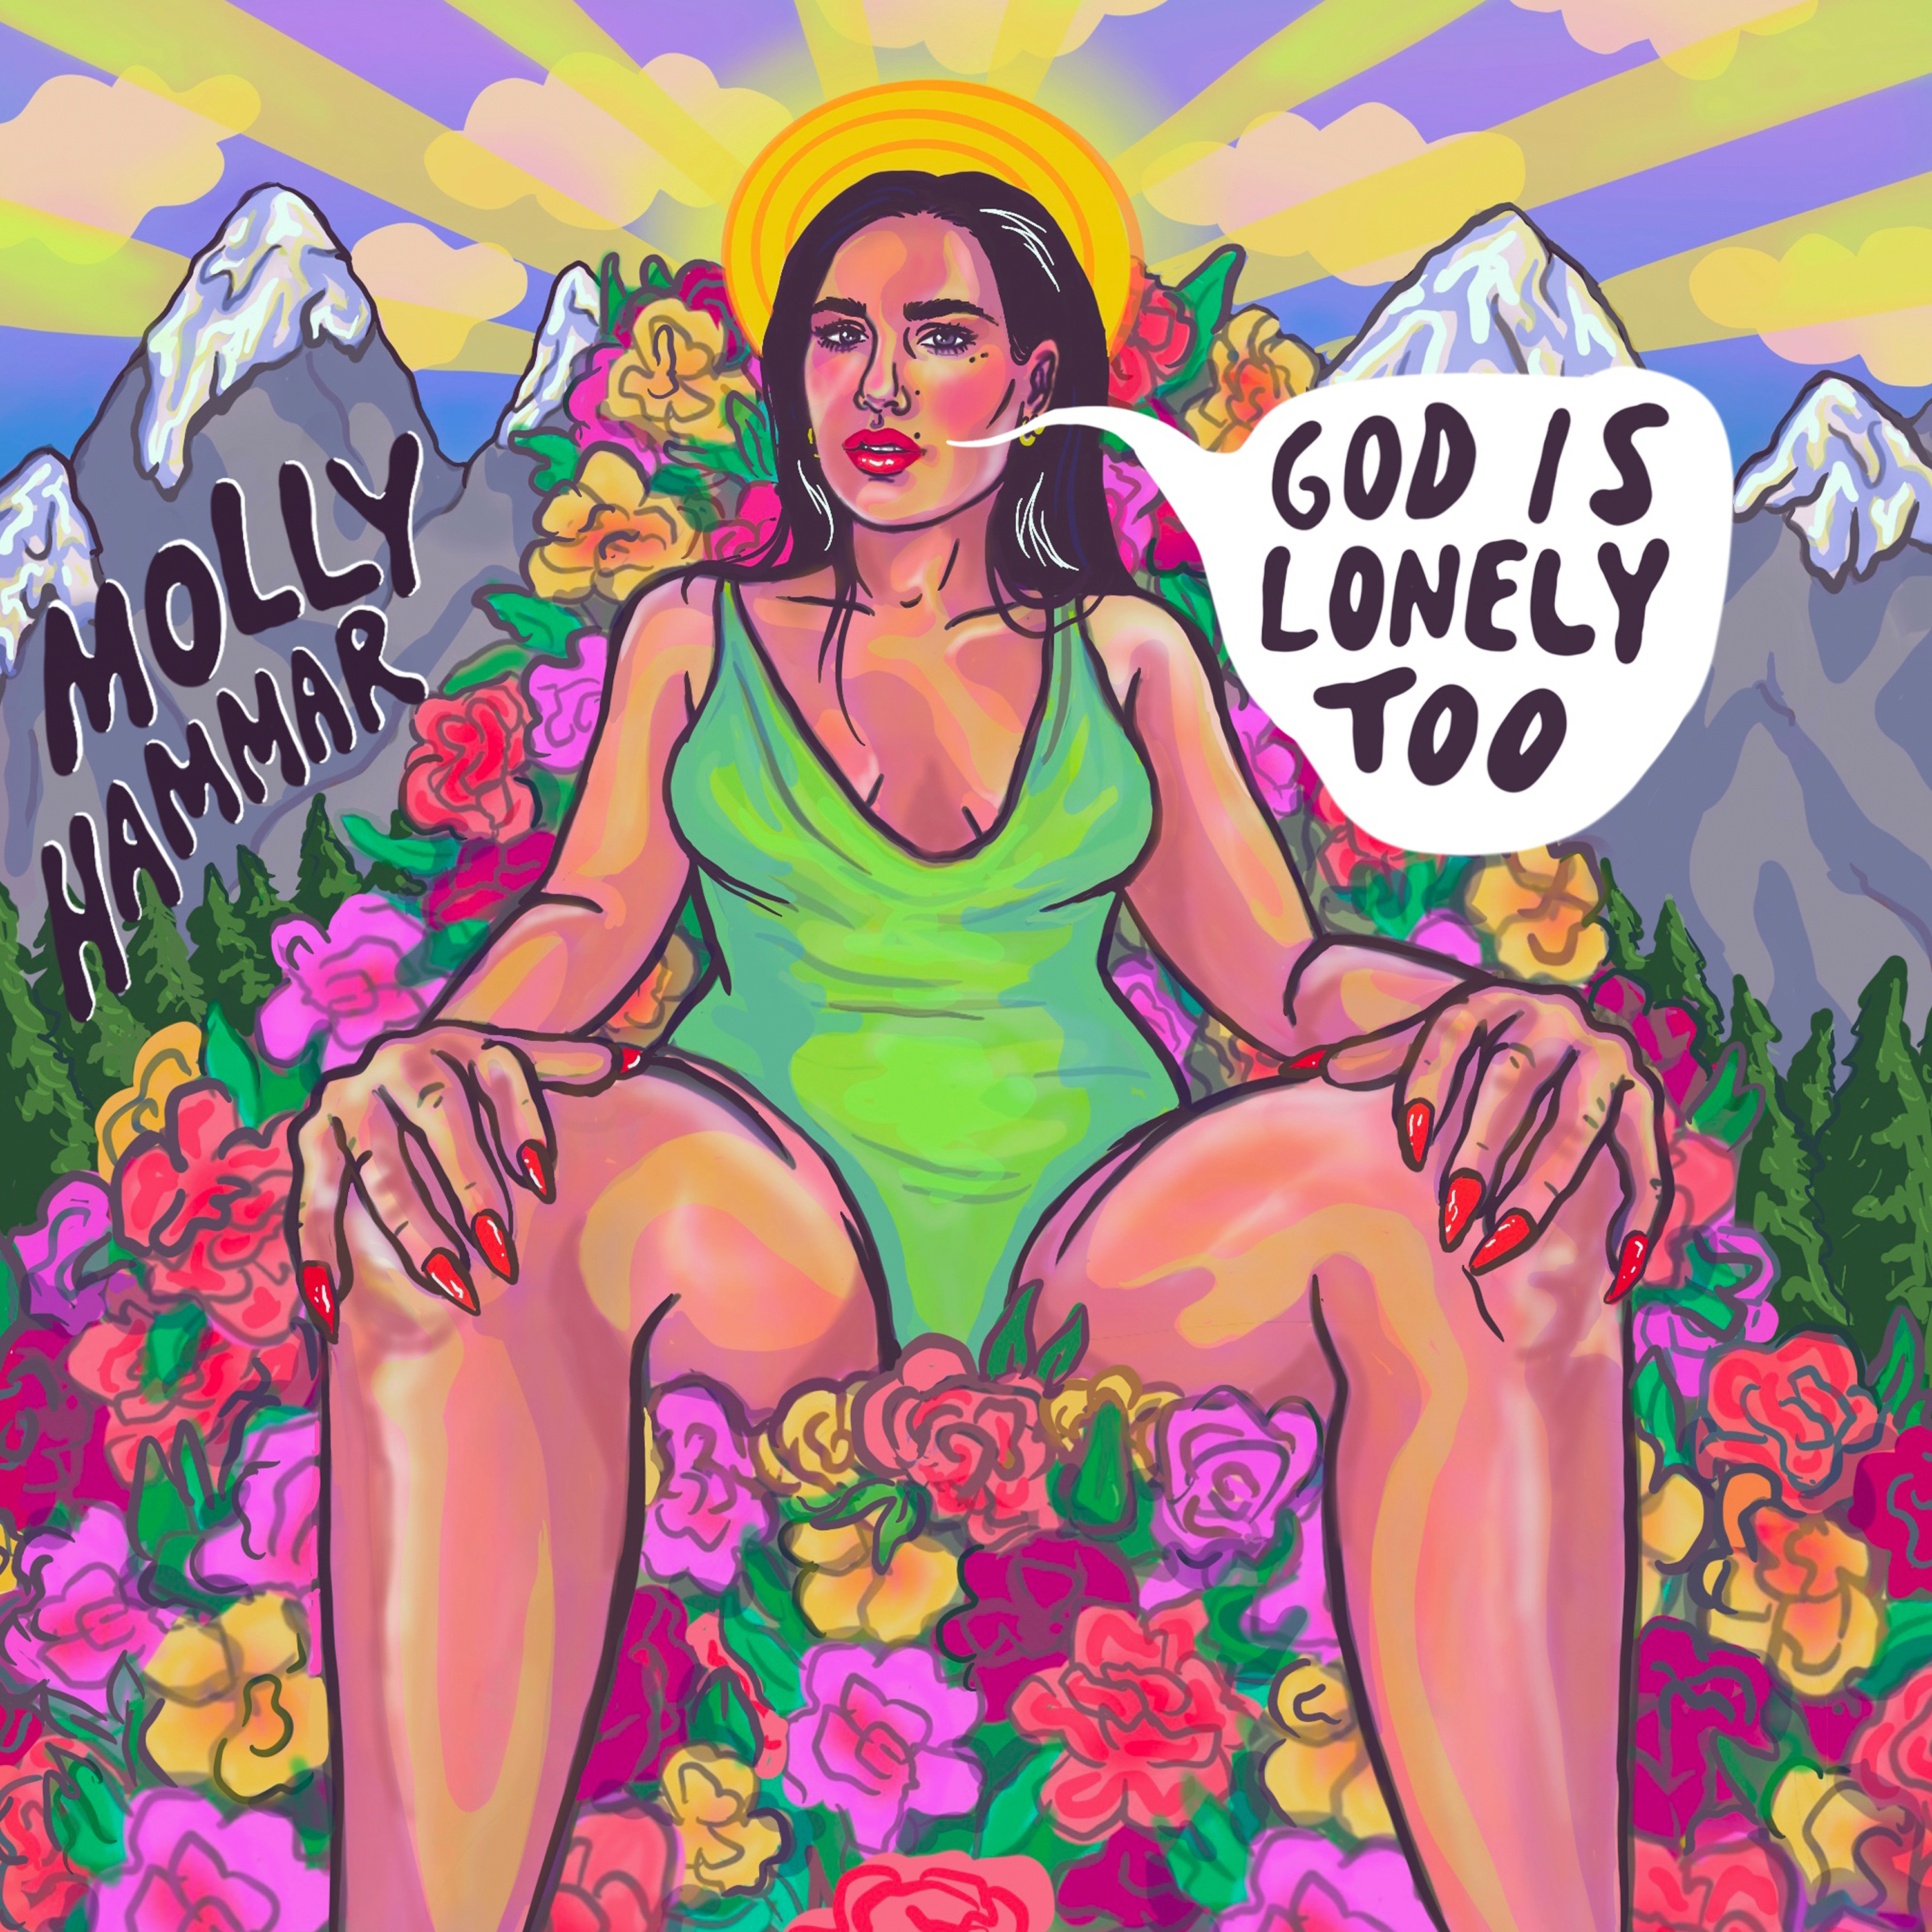 God Is Lonely Too - Molly Hammar